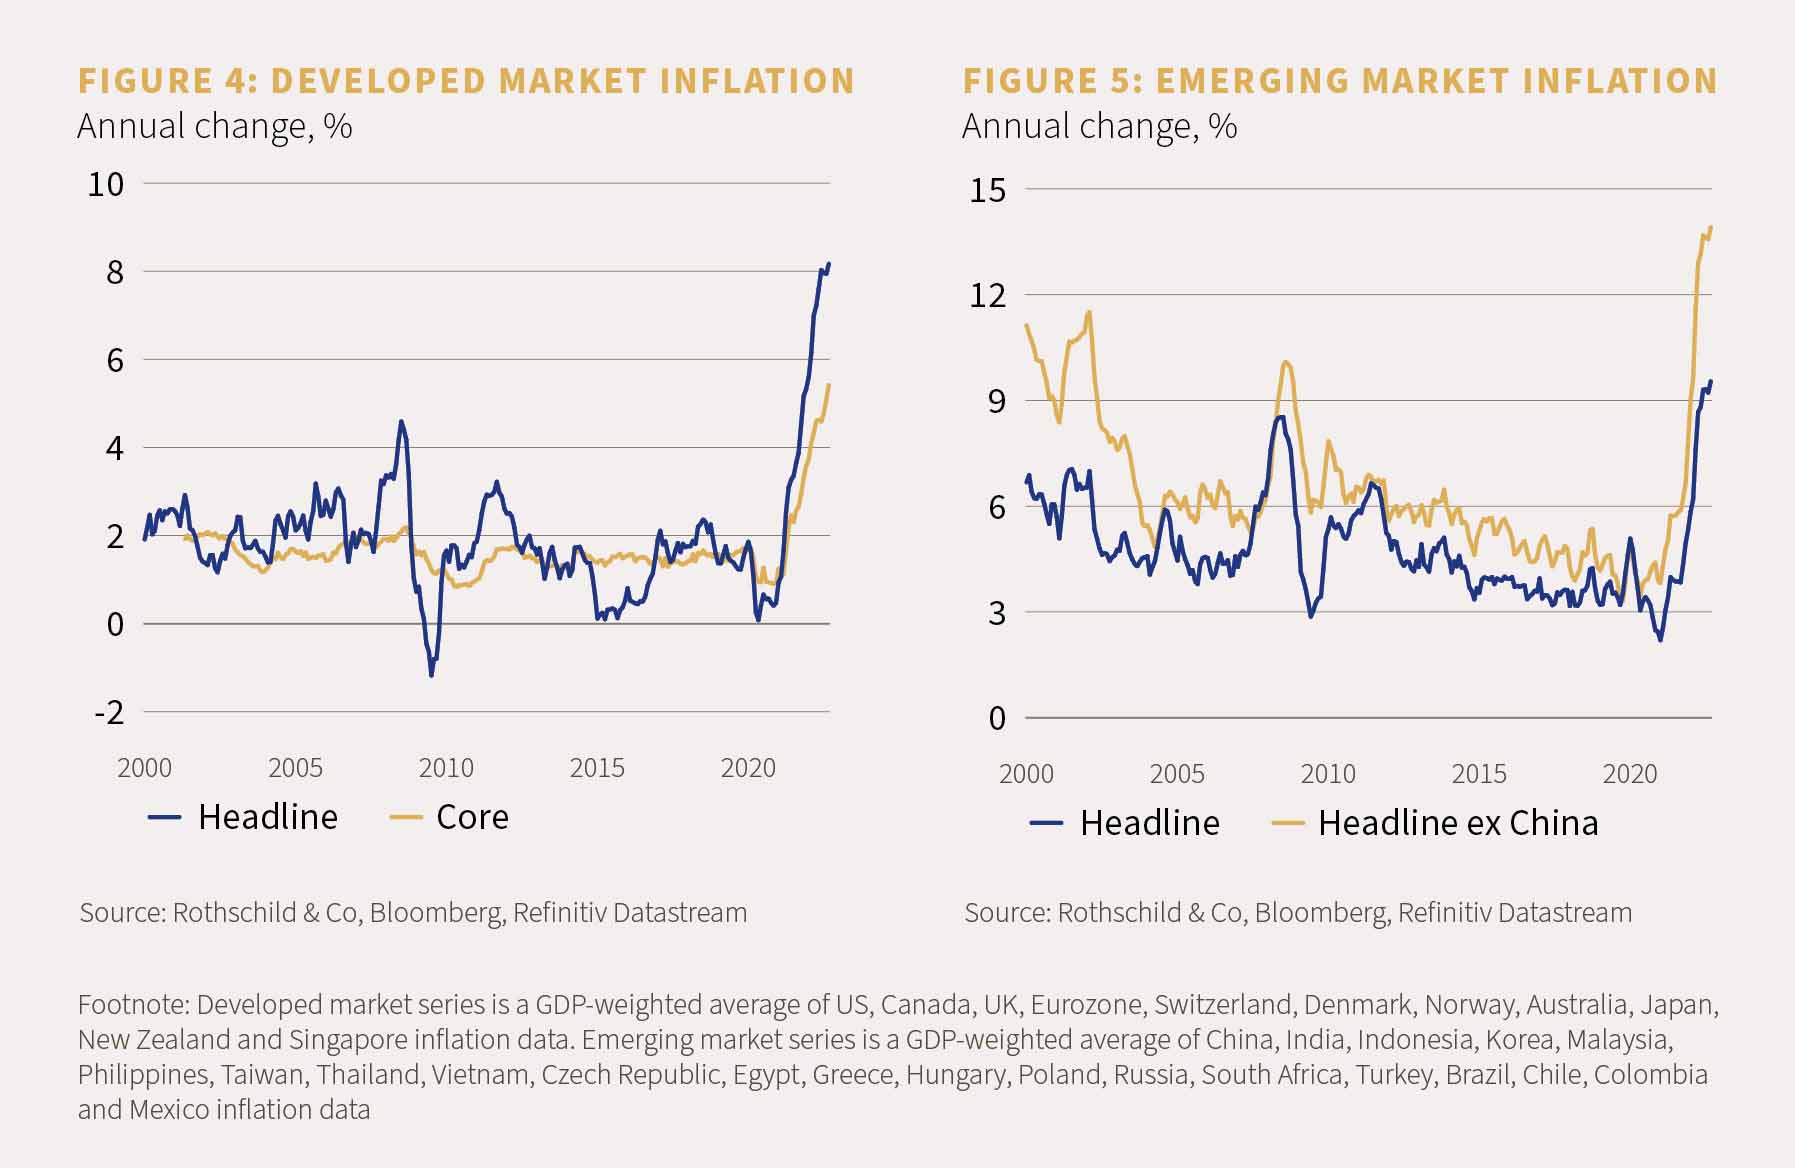 Chart 4 showing the developed market inflation and chart 5 showing the emerging market inflation